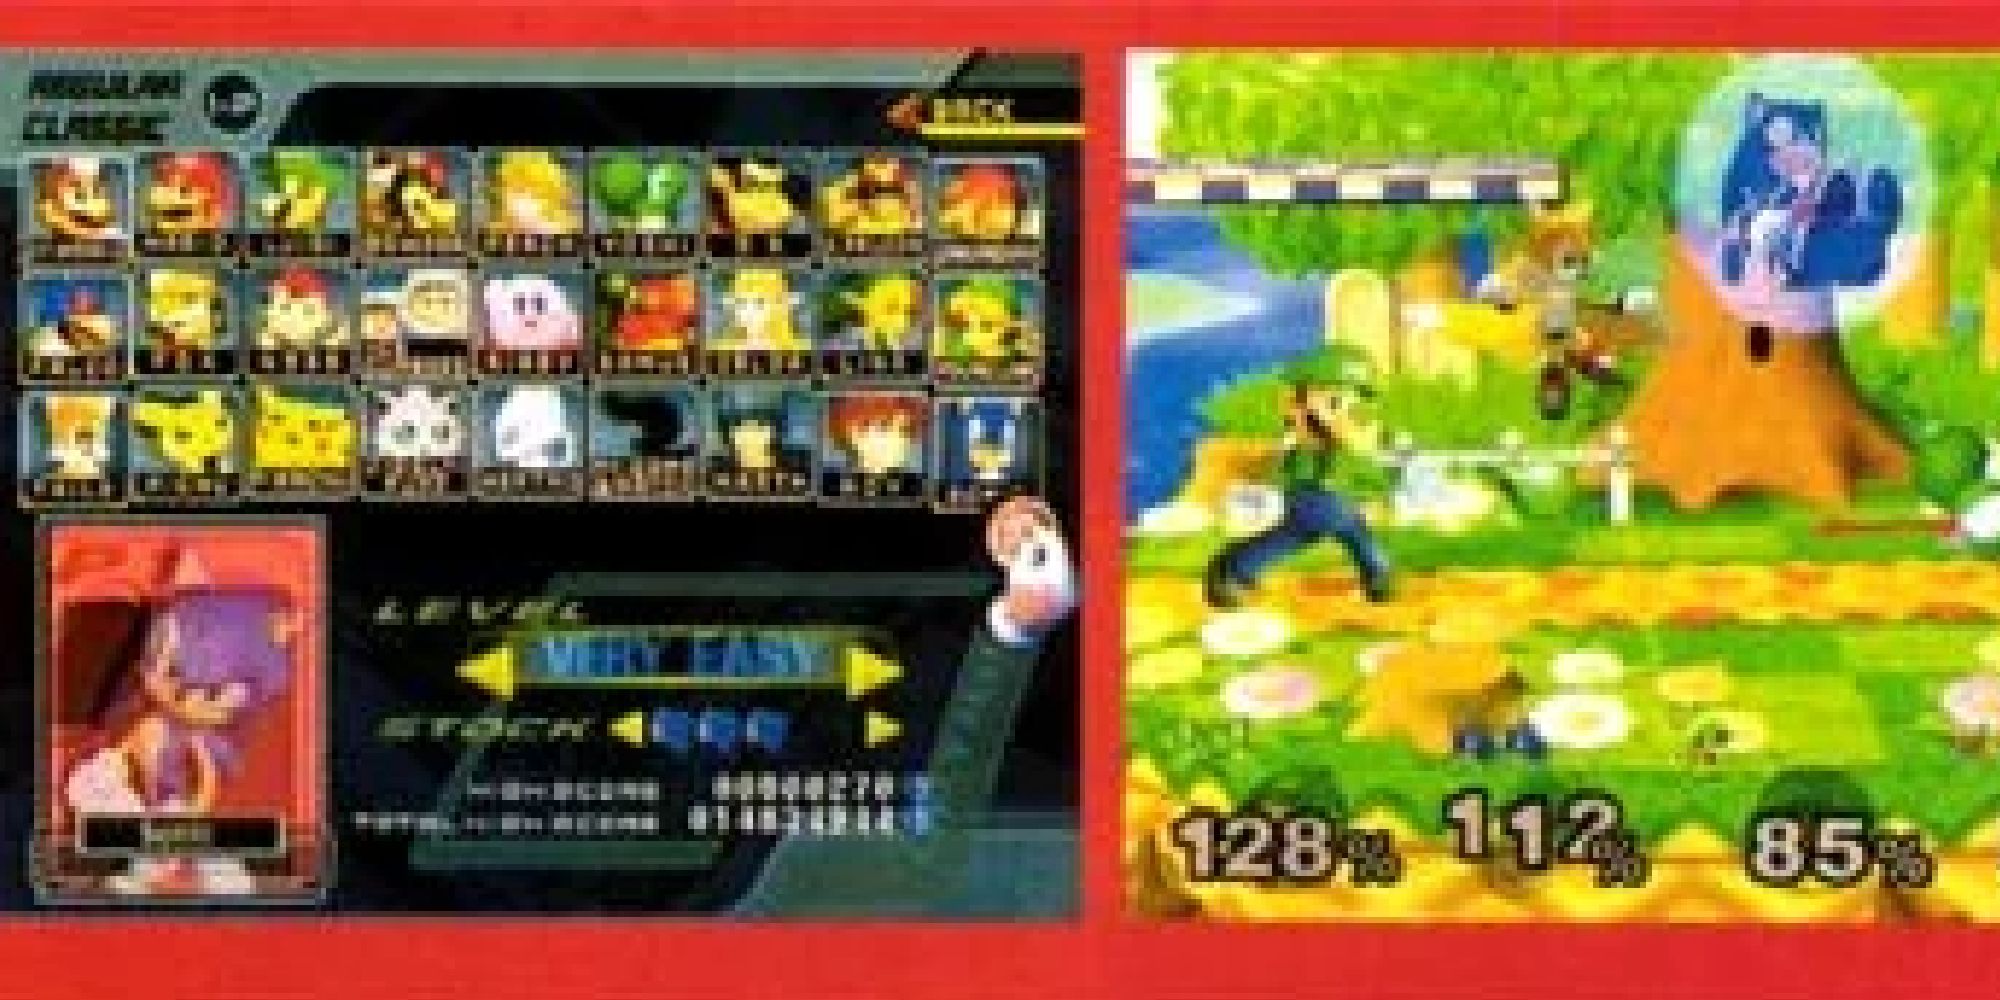 Photoshopped screenshots of Sonic and Tails in Melee from Electronic Gaming Monthly